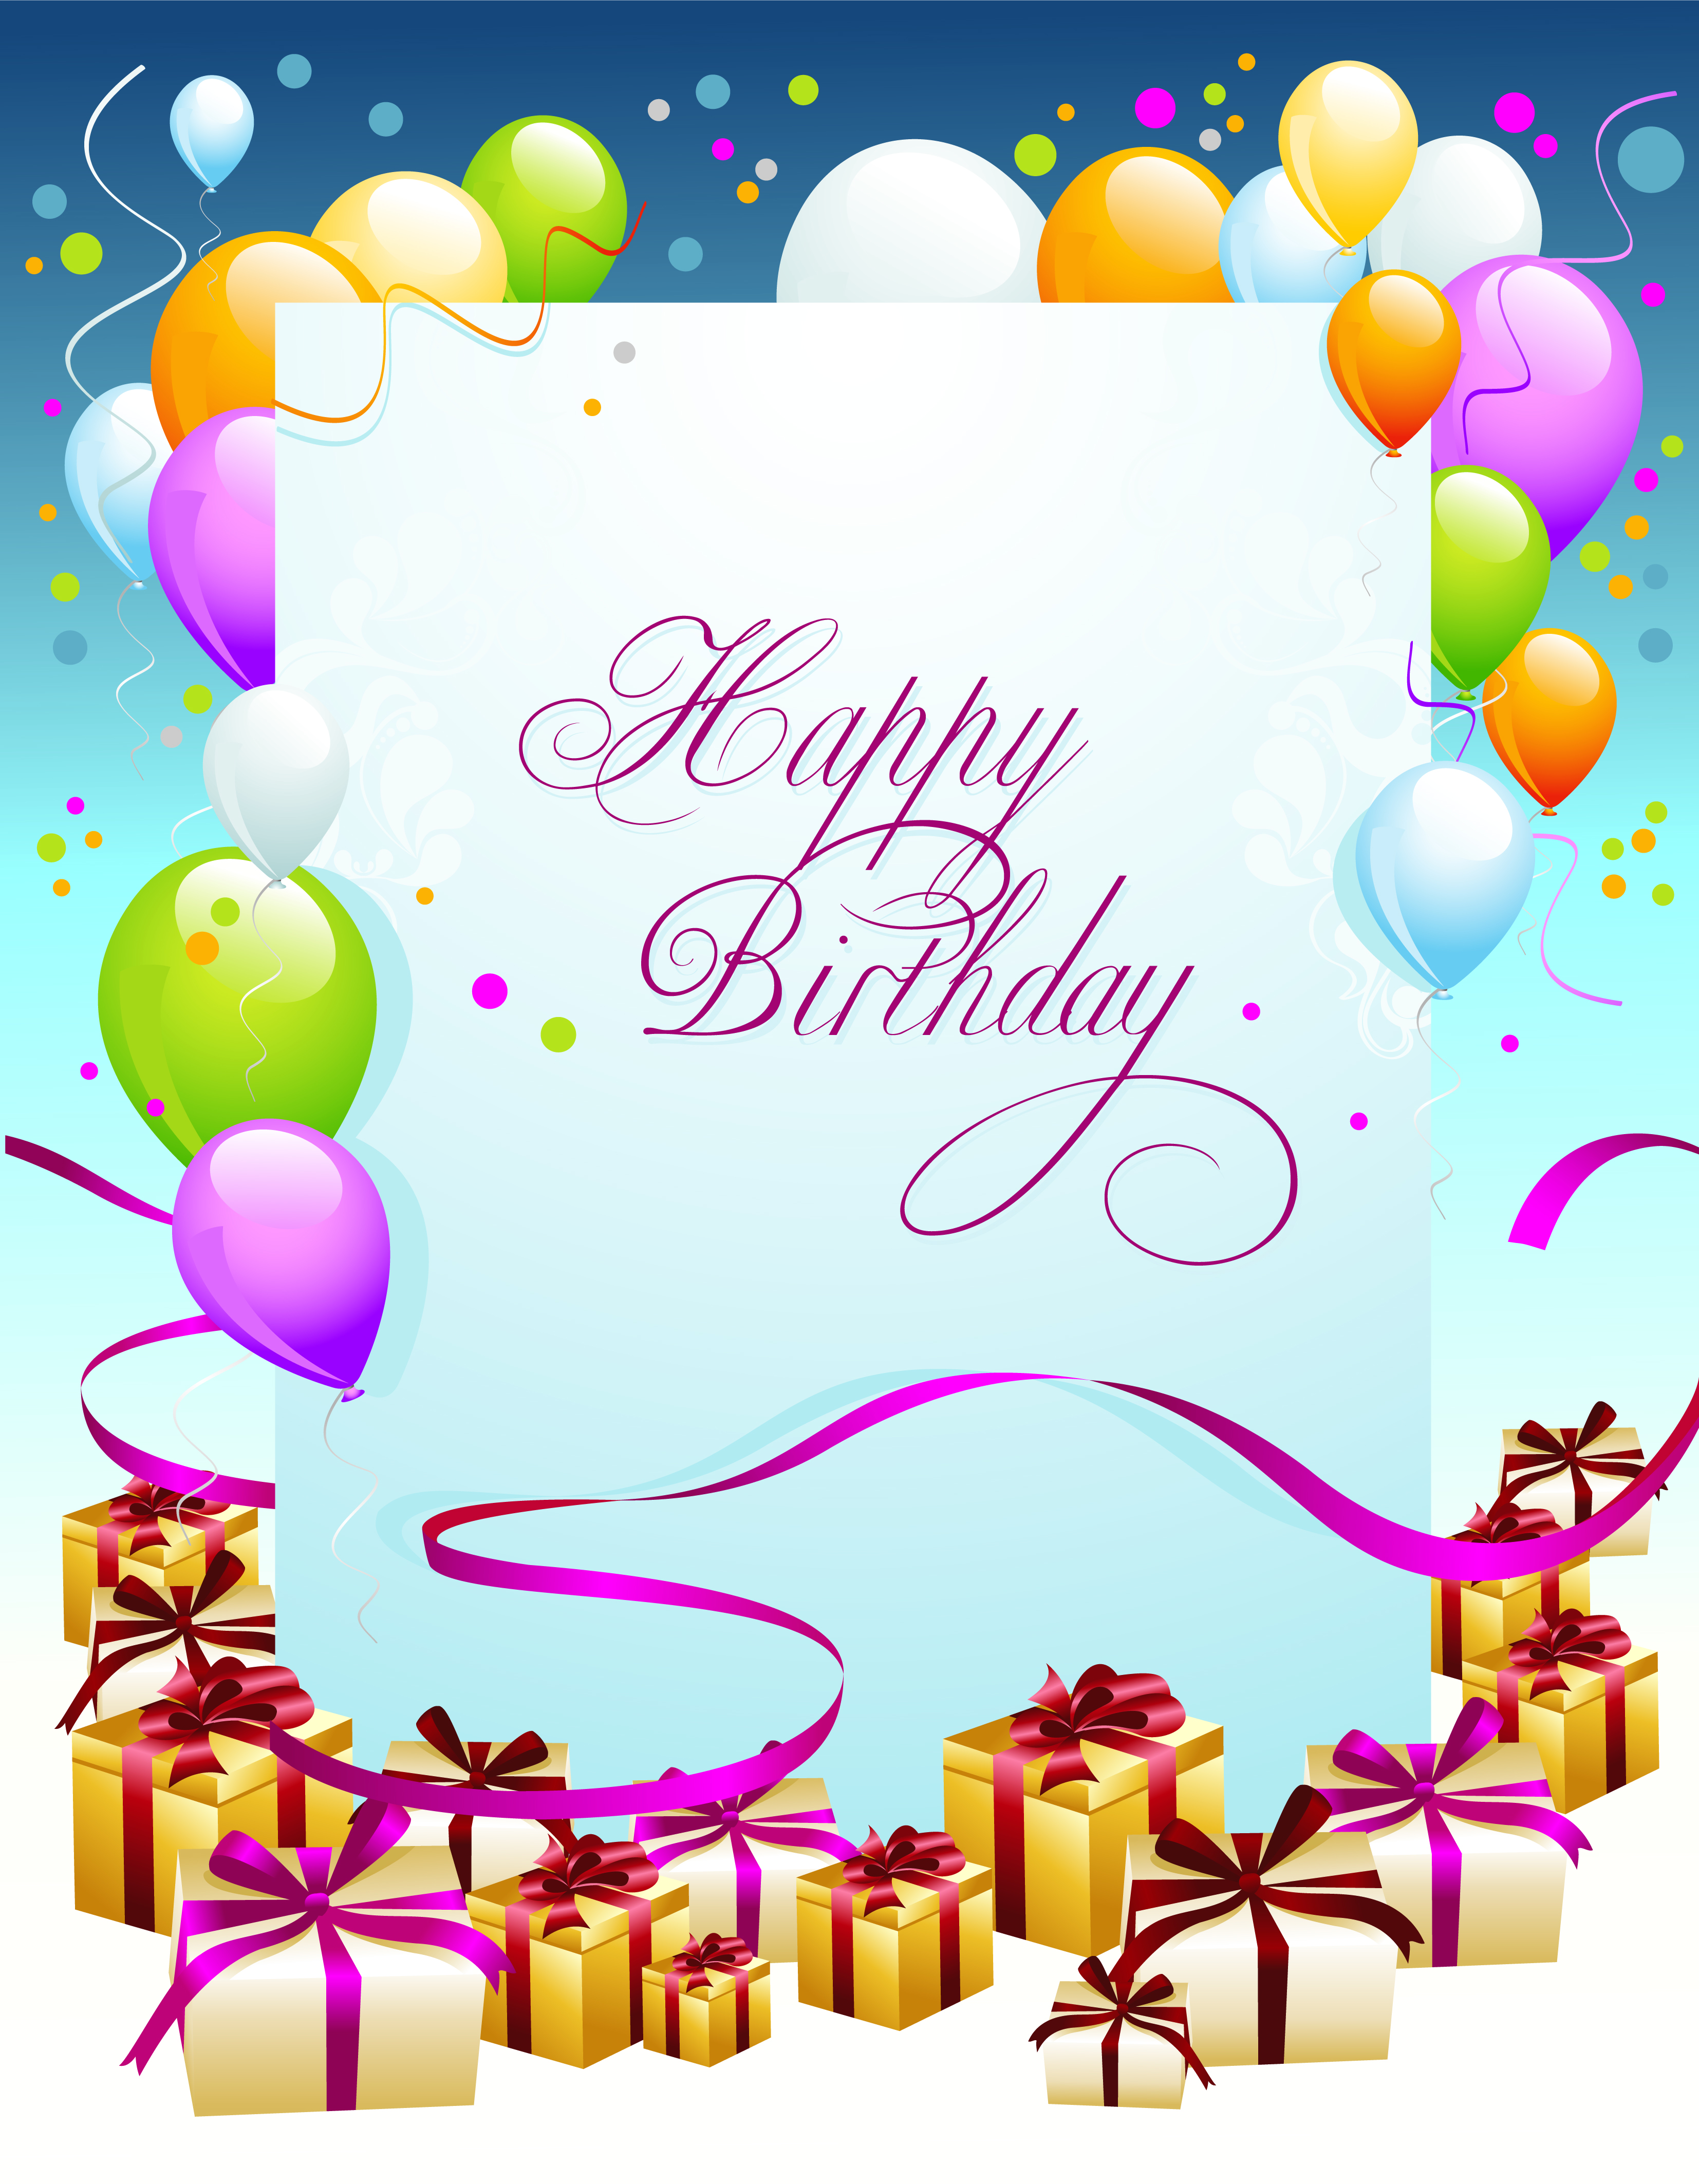 Free clipart birthday cards